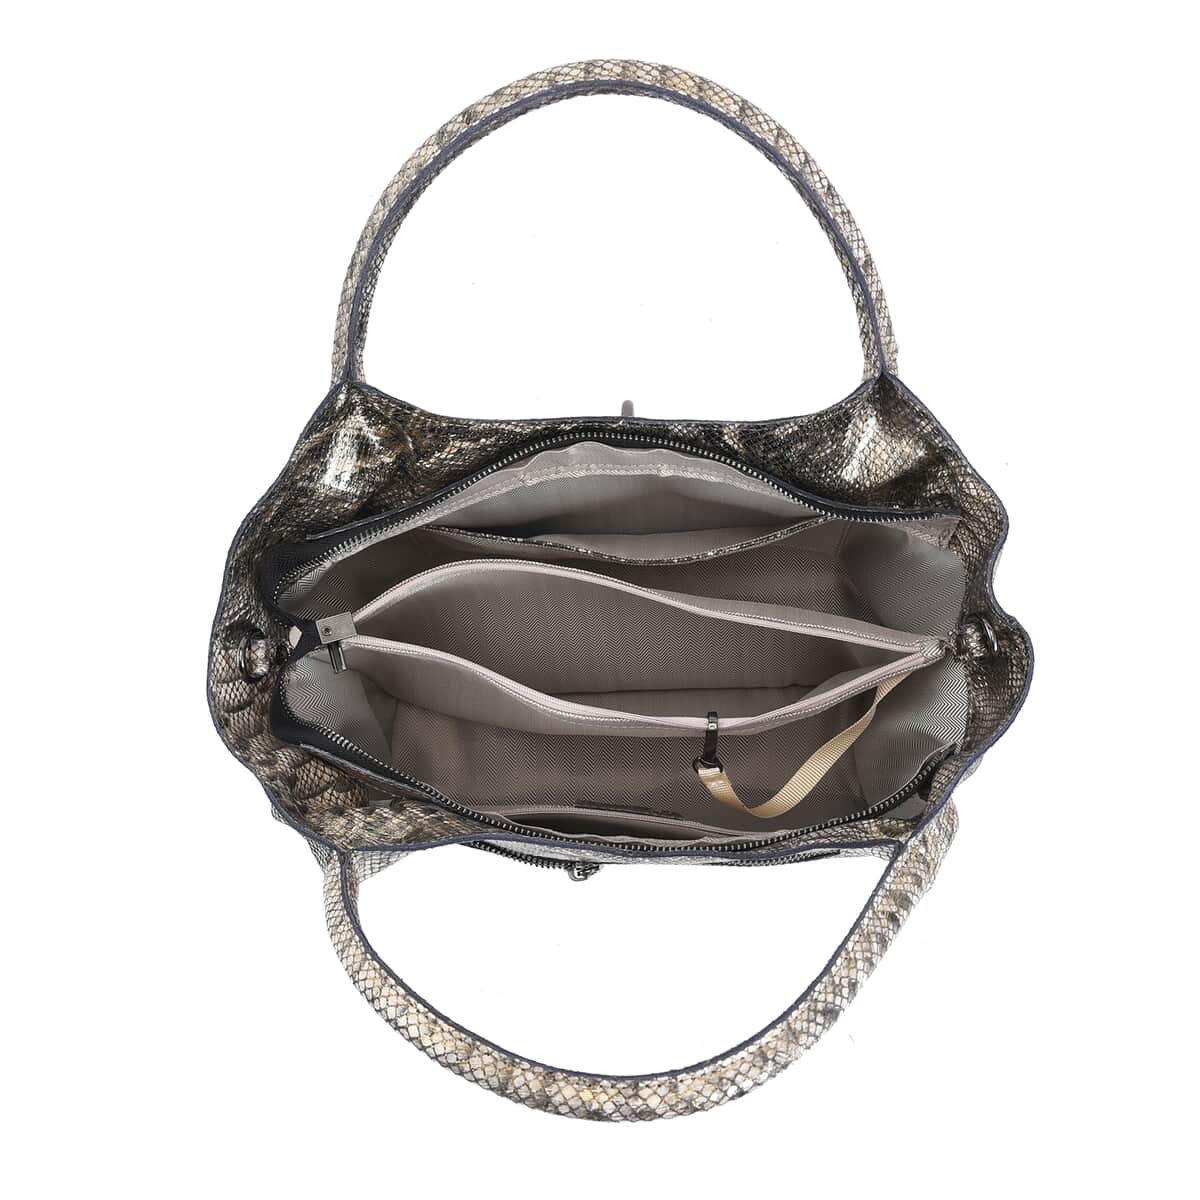 Gold and Black Snake Print Genuine Leather Hobo Bag with Detachable Shoulder Strap and Handle Drop image number 5